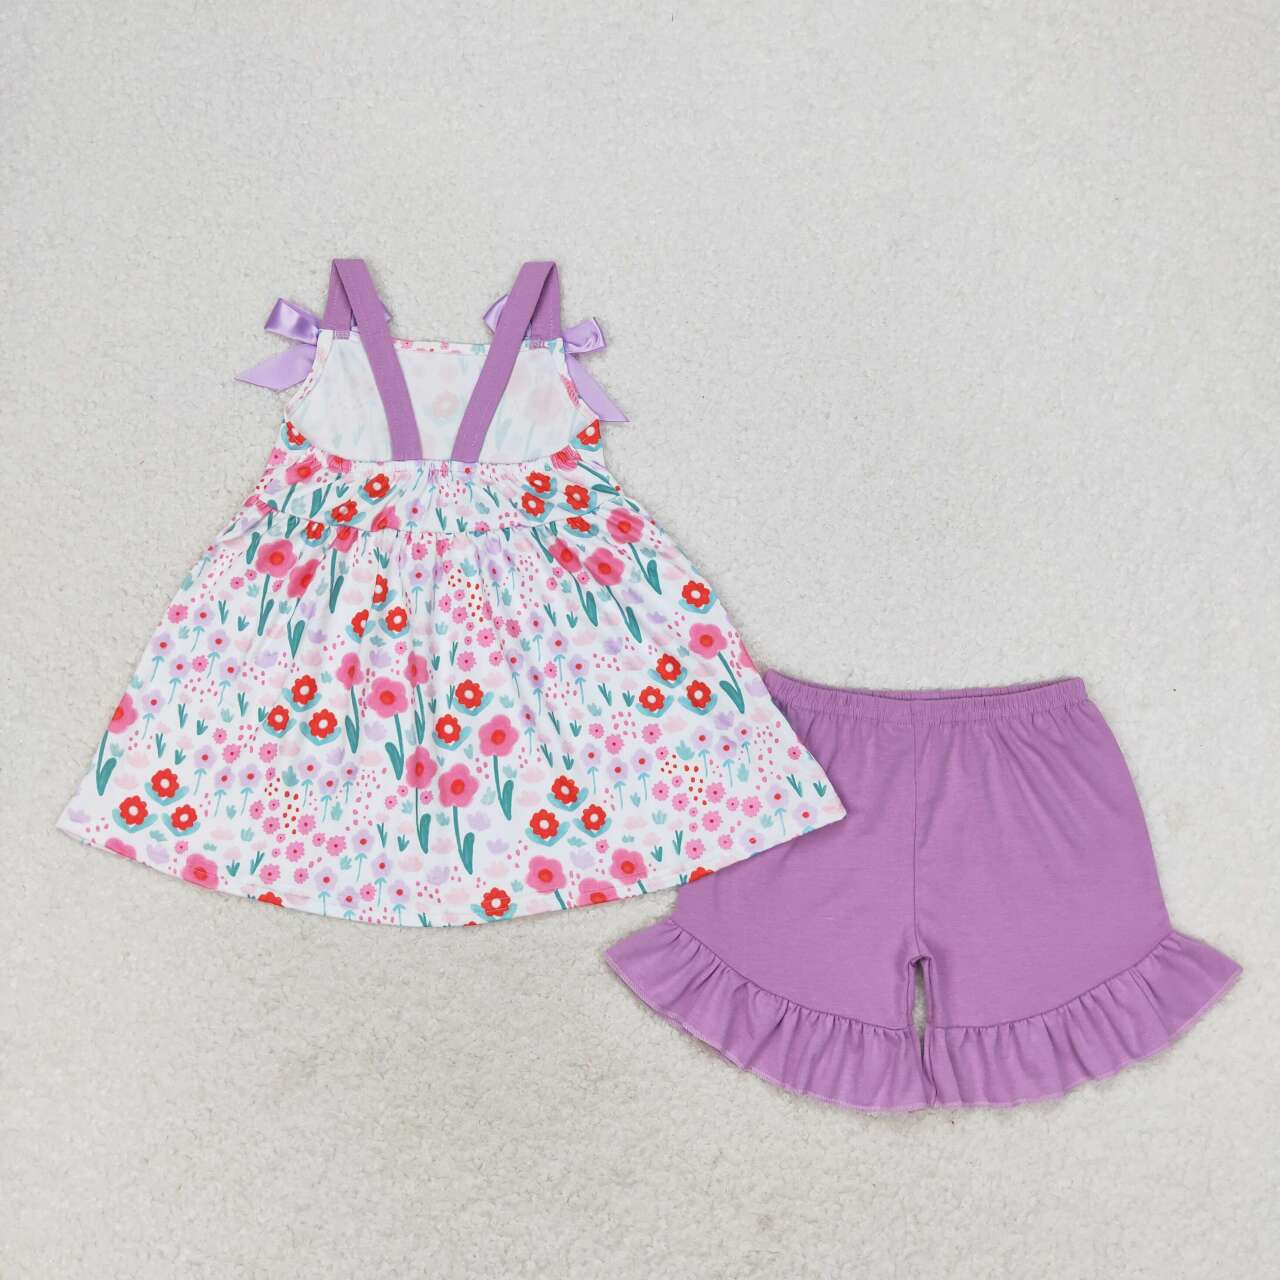 Baby Floral Top Ruffle Purple Shorts Set